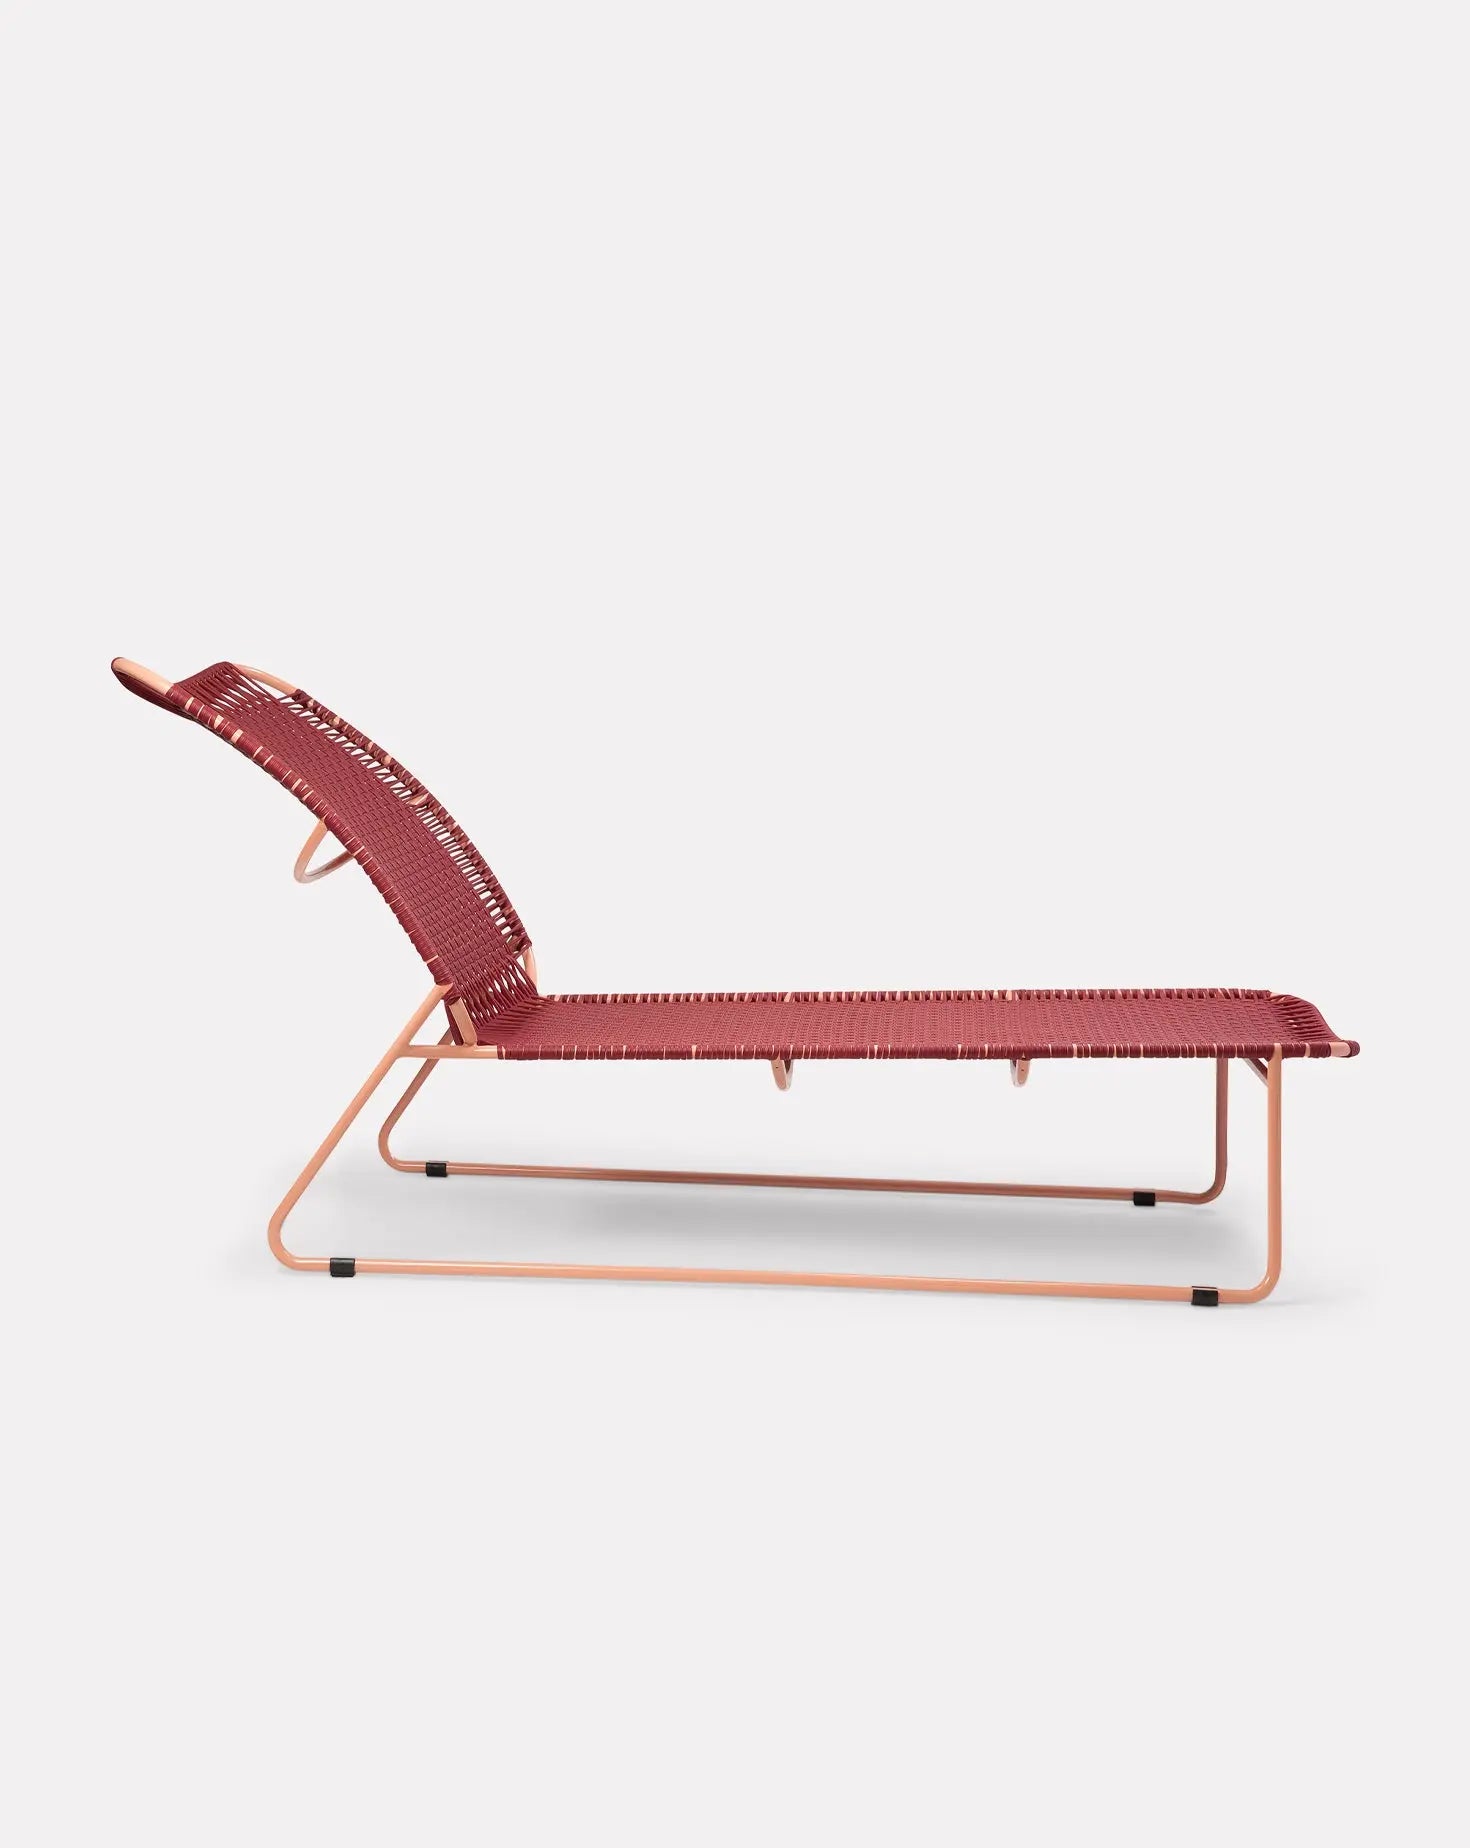 Cielo Red & Pink Sand Daybed Ames Living